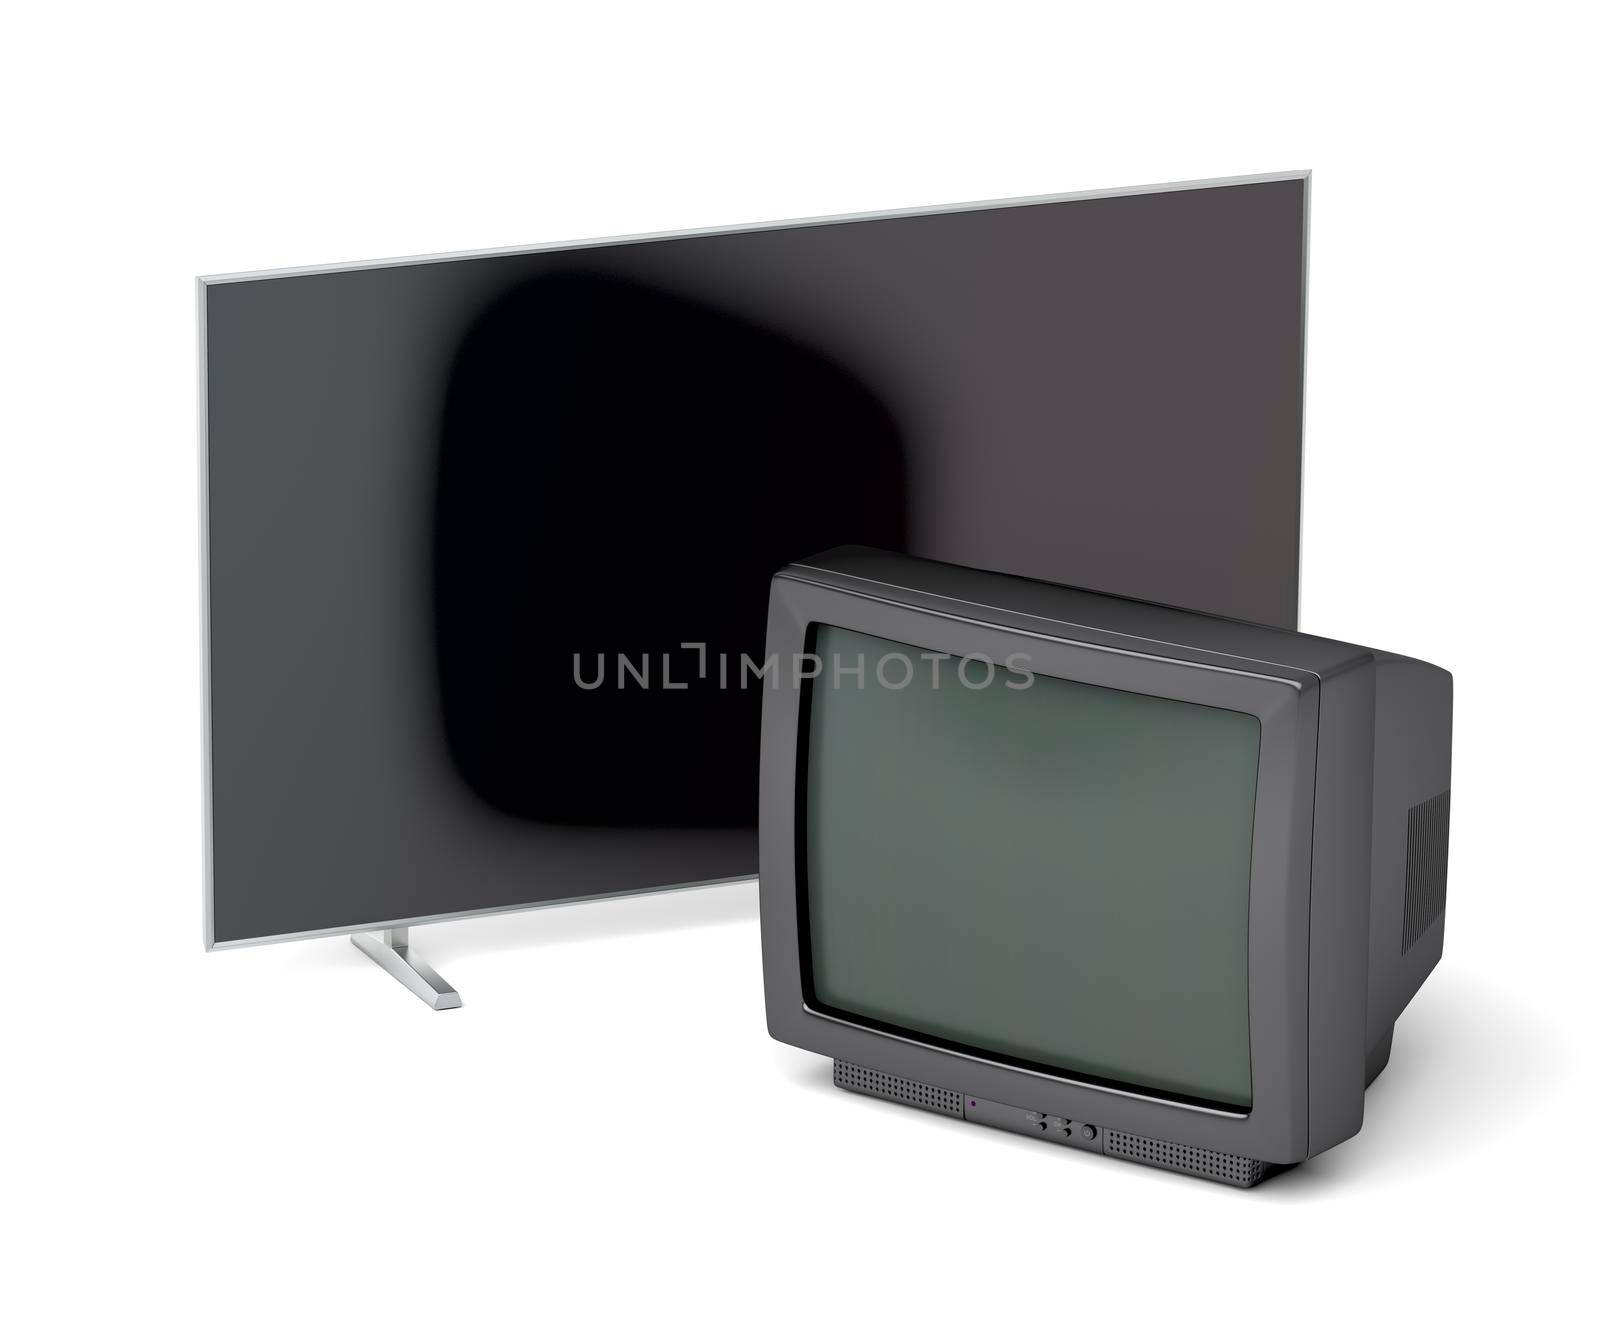 Flat screen and CRT televisions by magraphics